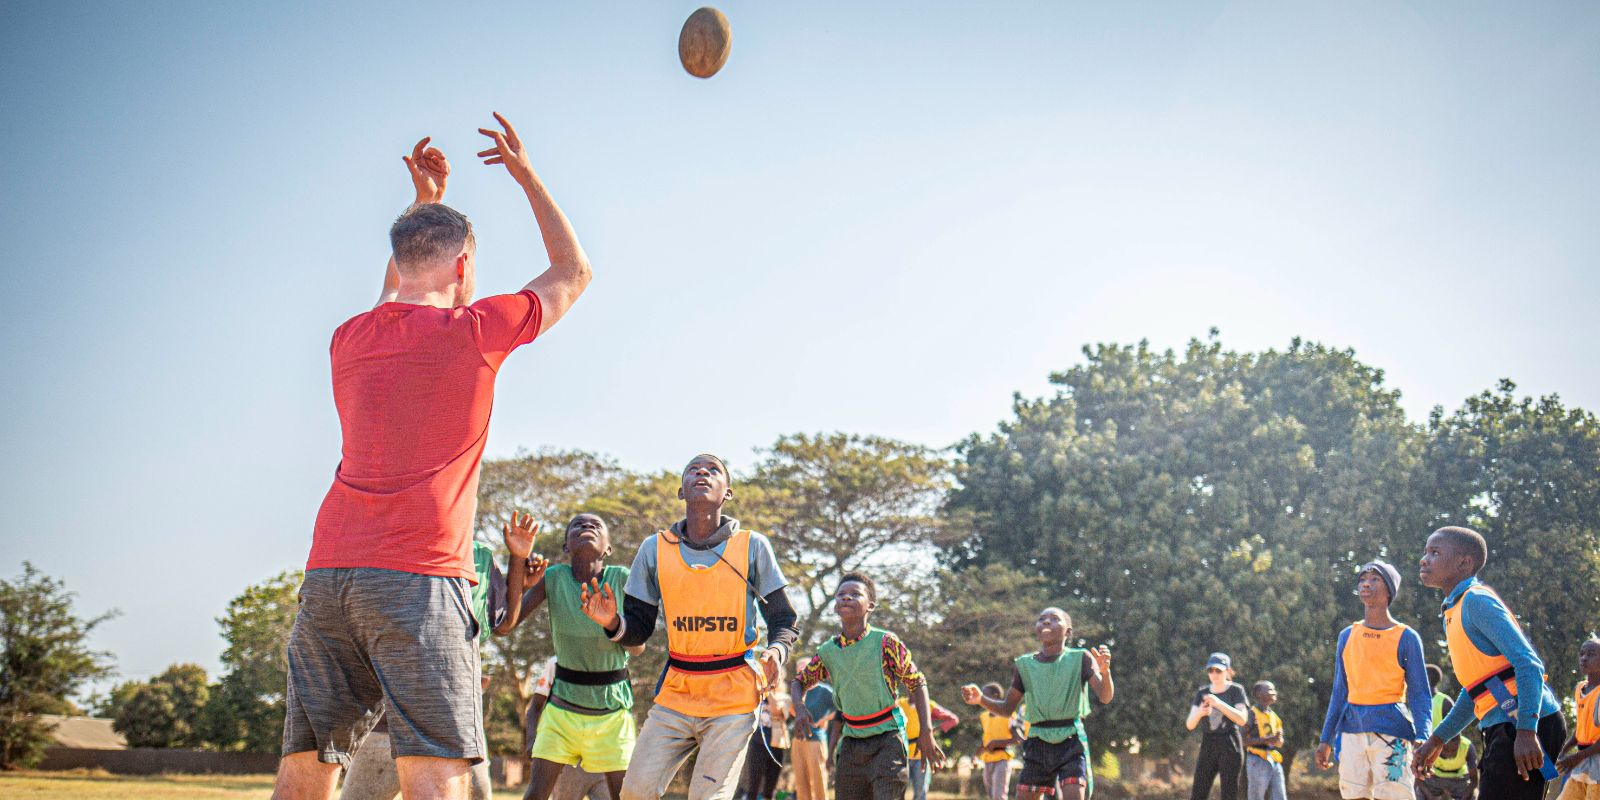 A group of people, likely a mix of locals and visitors, engaged in a game of rugby in an outdoor setting, with a clear focus on interaction, teamwork, and community participation.